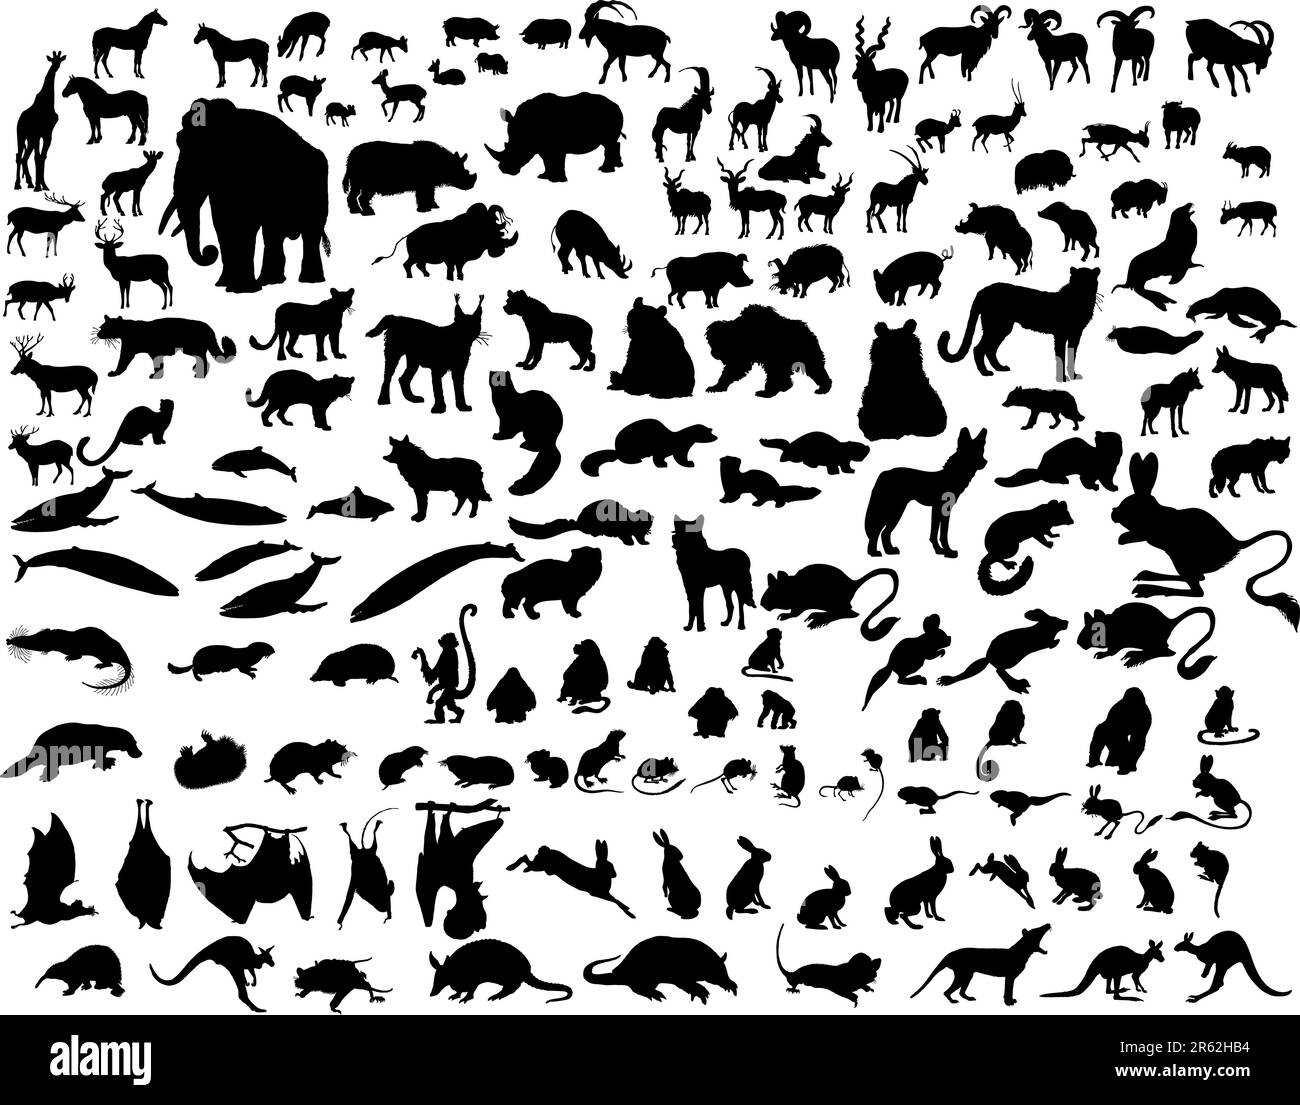 Big collection of different illustration vector animals Stock Vector